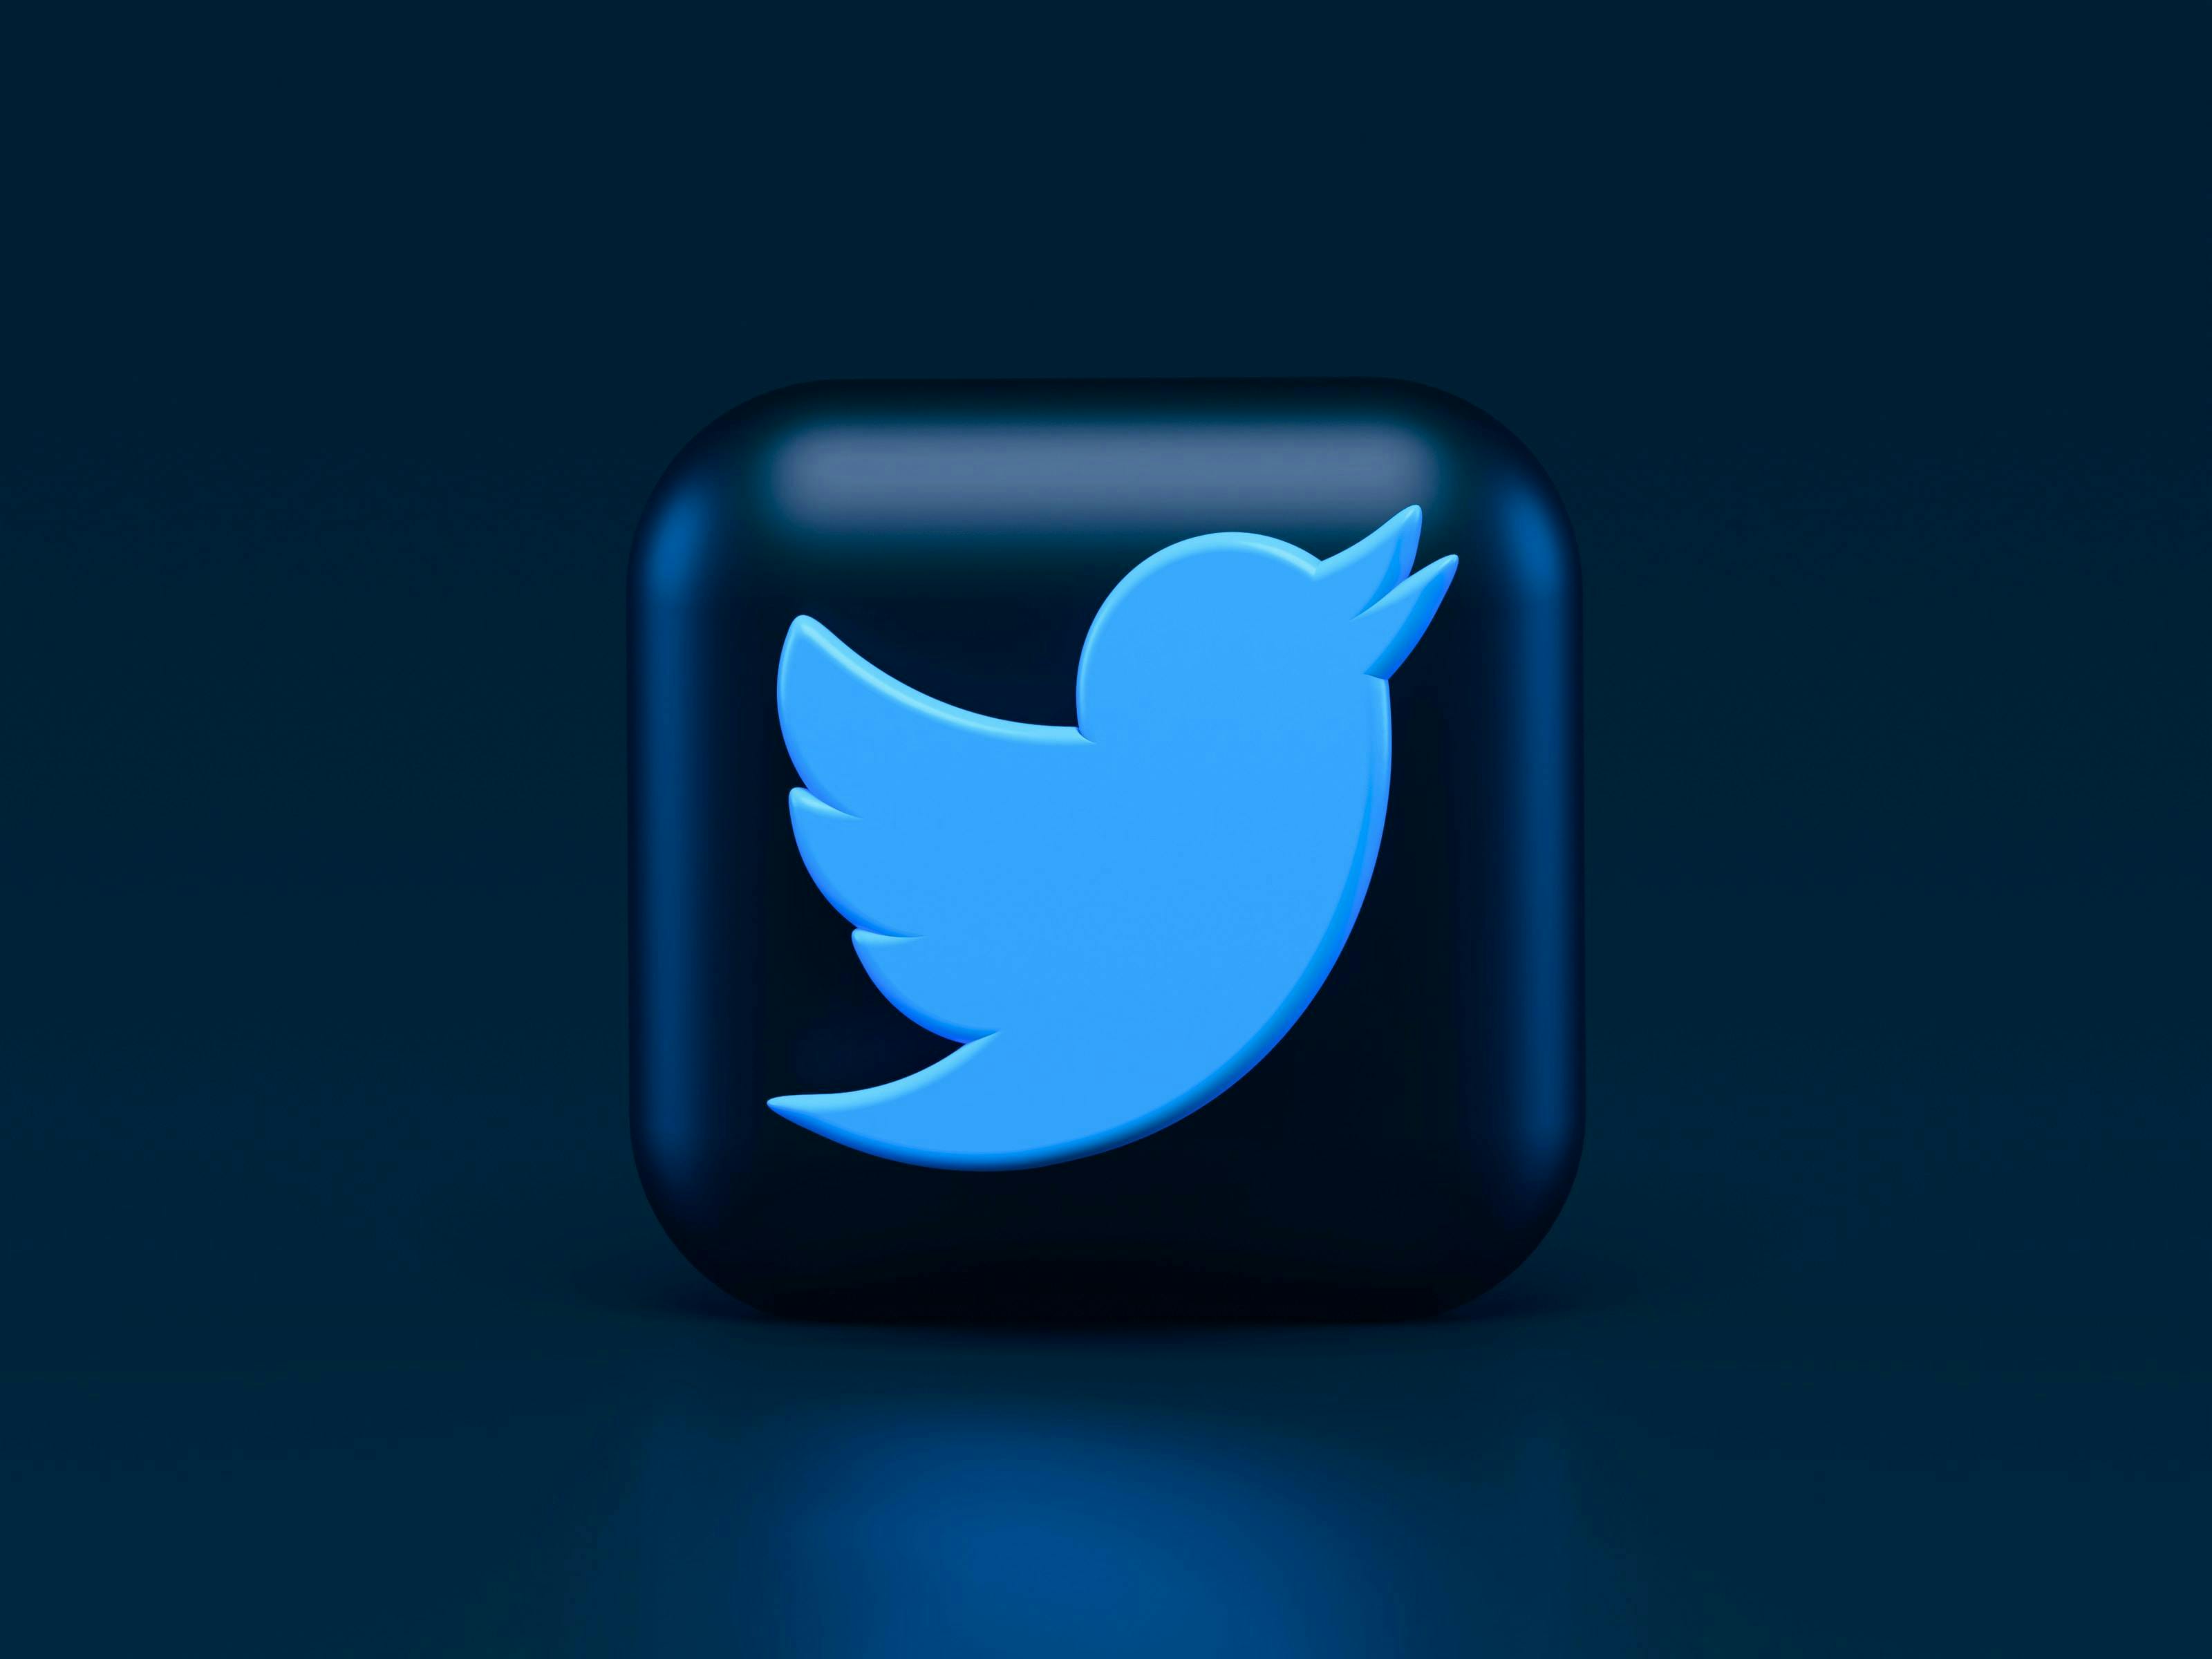 A blue bird icon is centered on a rounded black square, set against a dark blue background, representing the Twitter logo. No text is present.